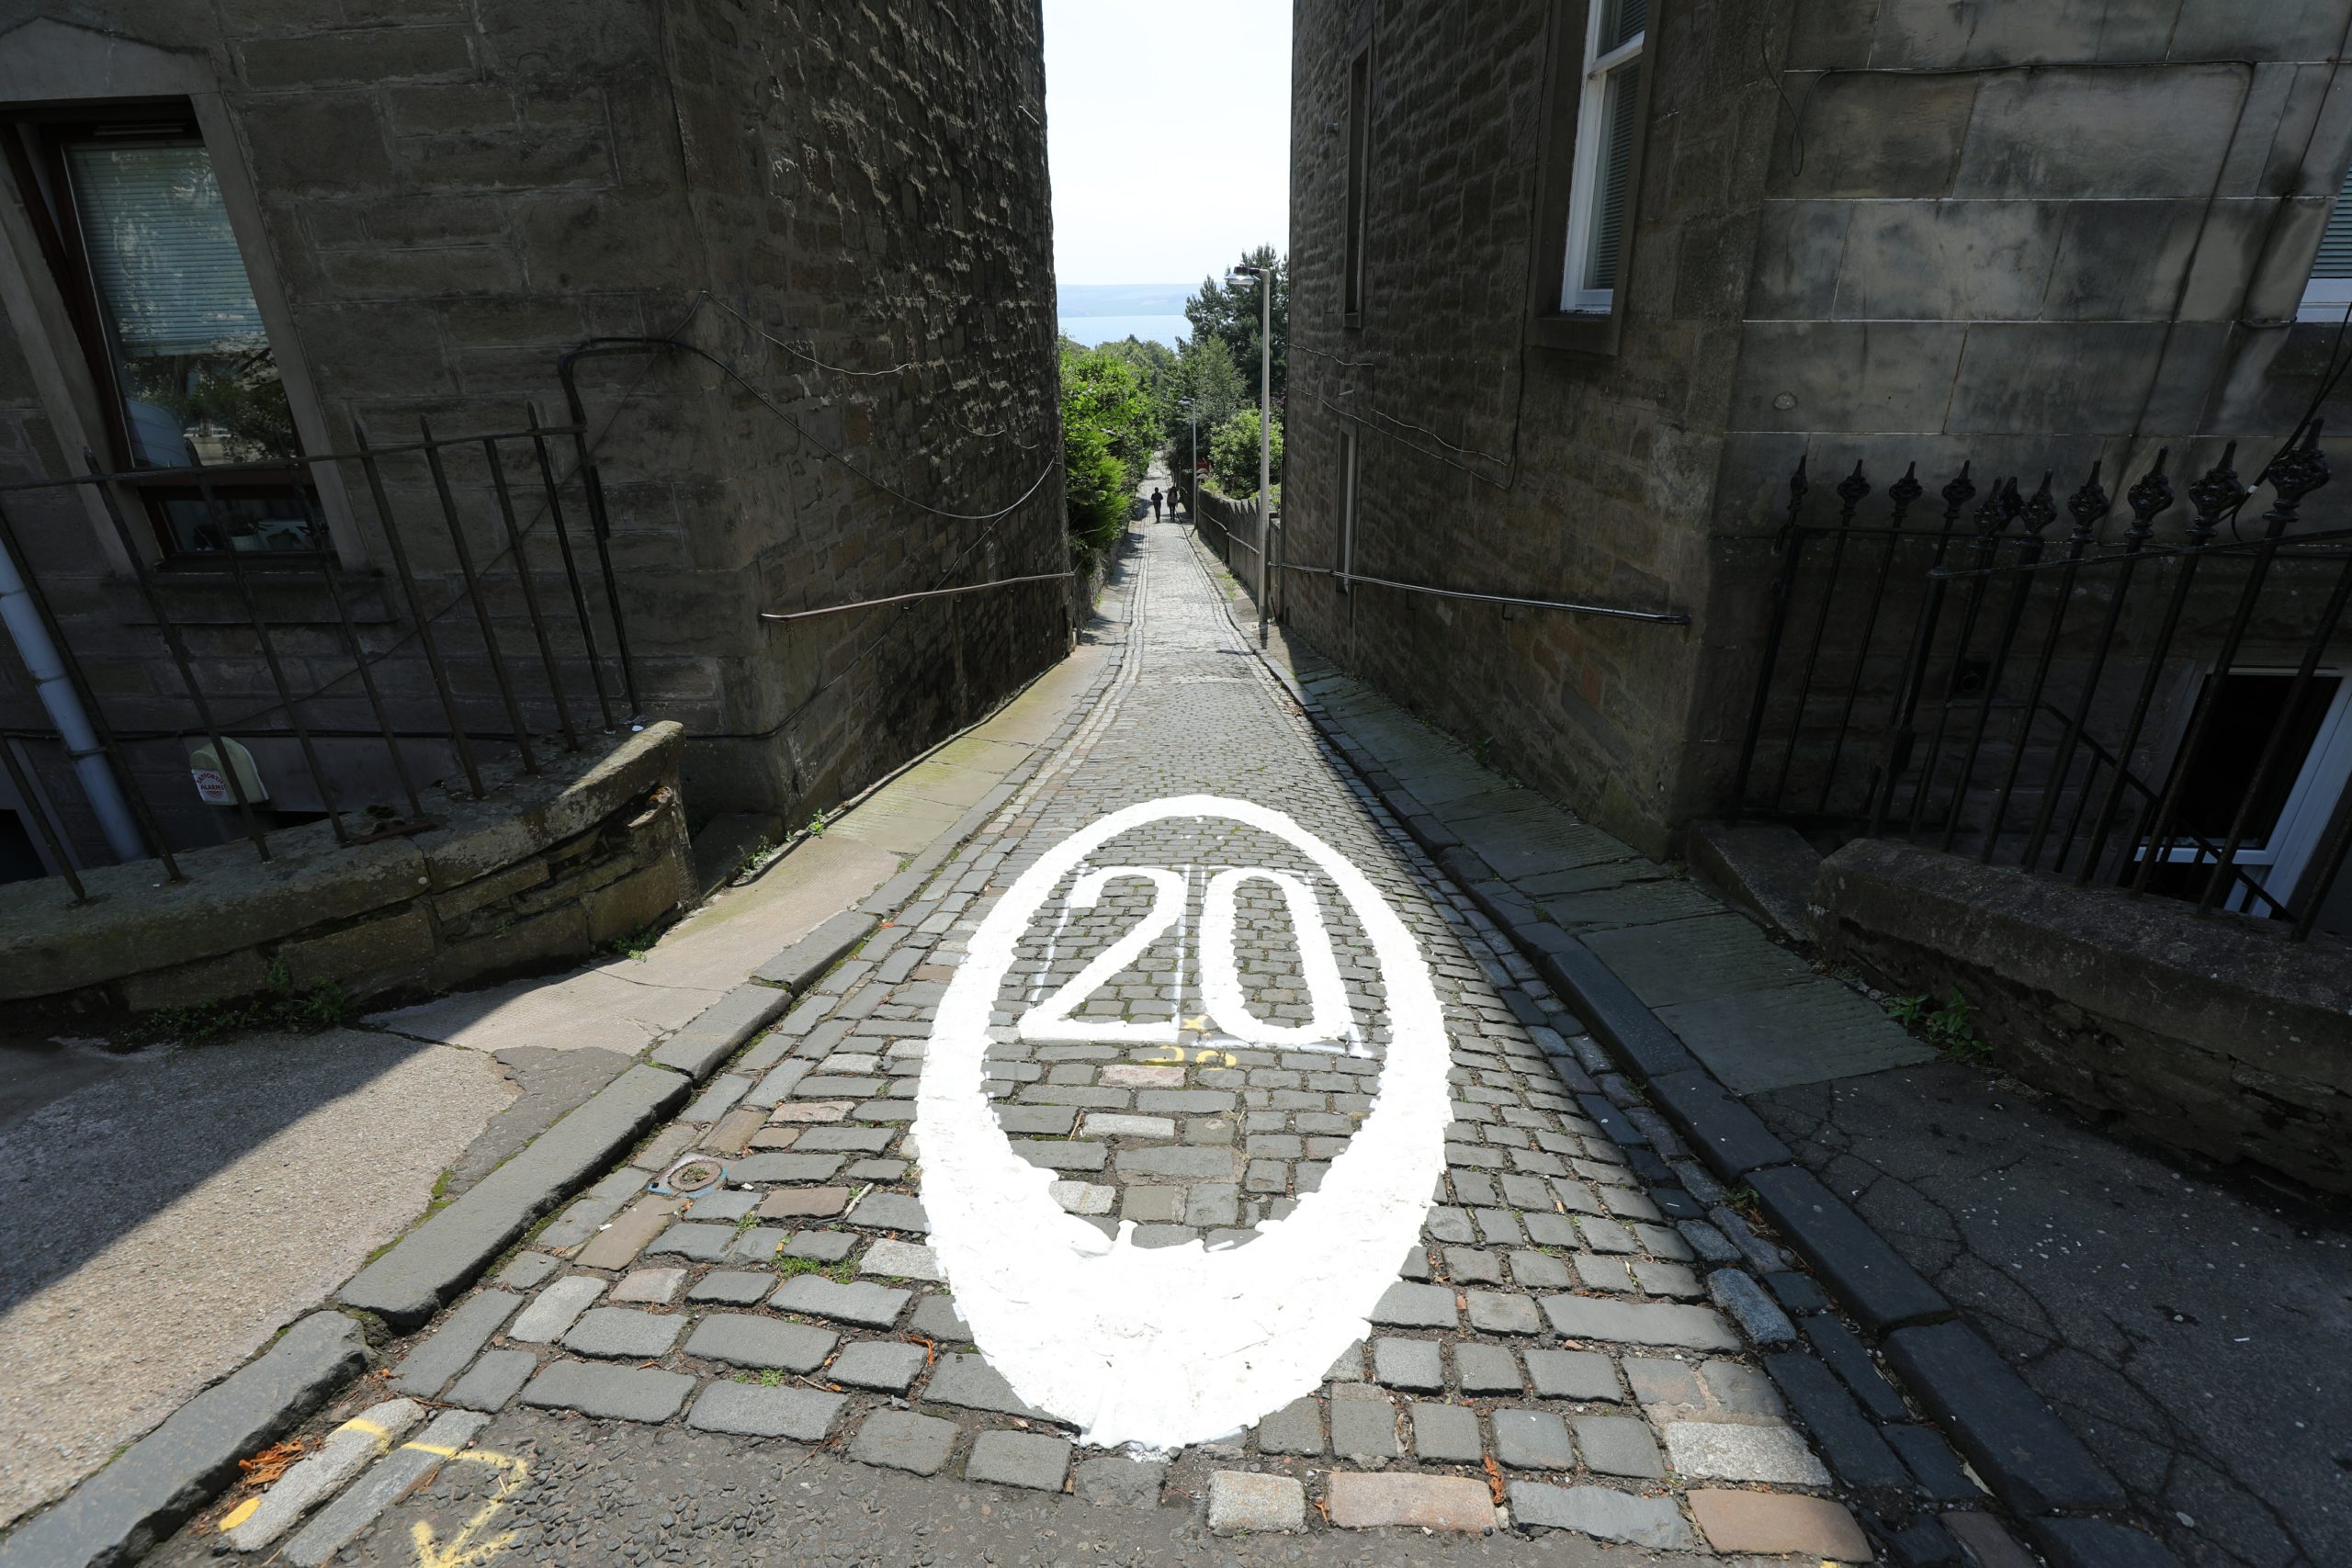 The new 20mph road marking at the top of Strawberrybank in Dundee.